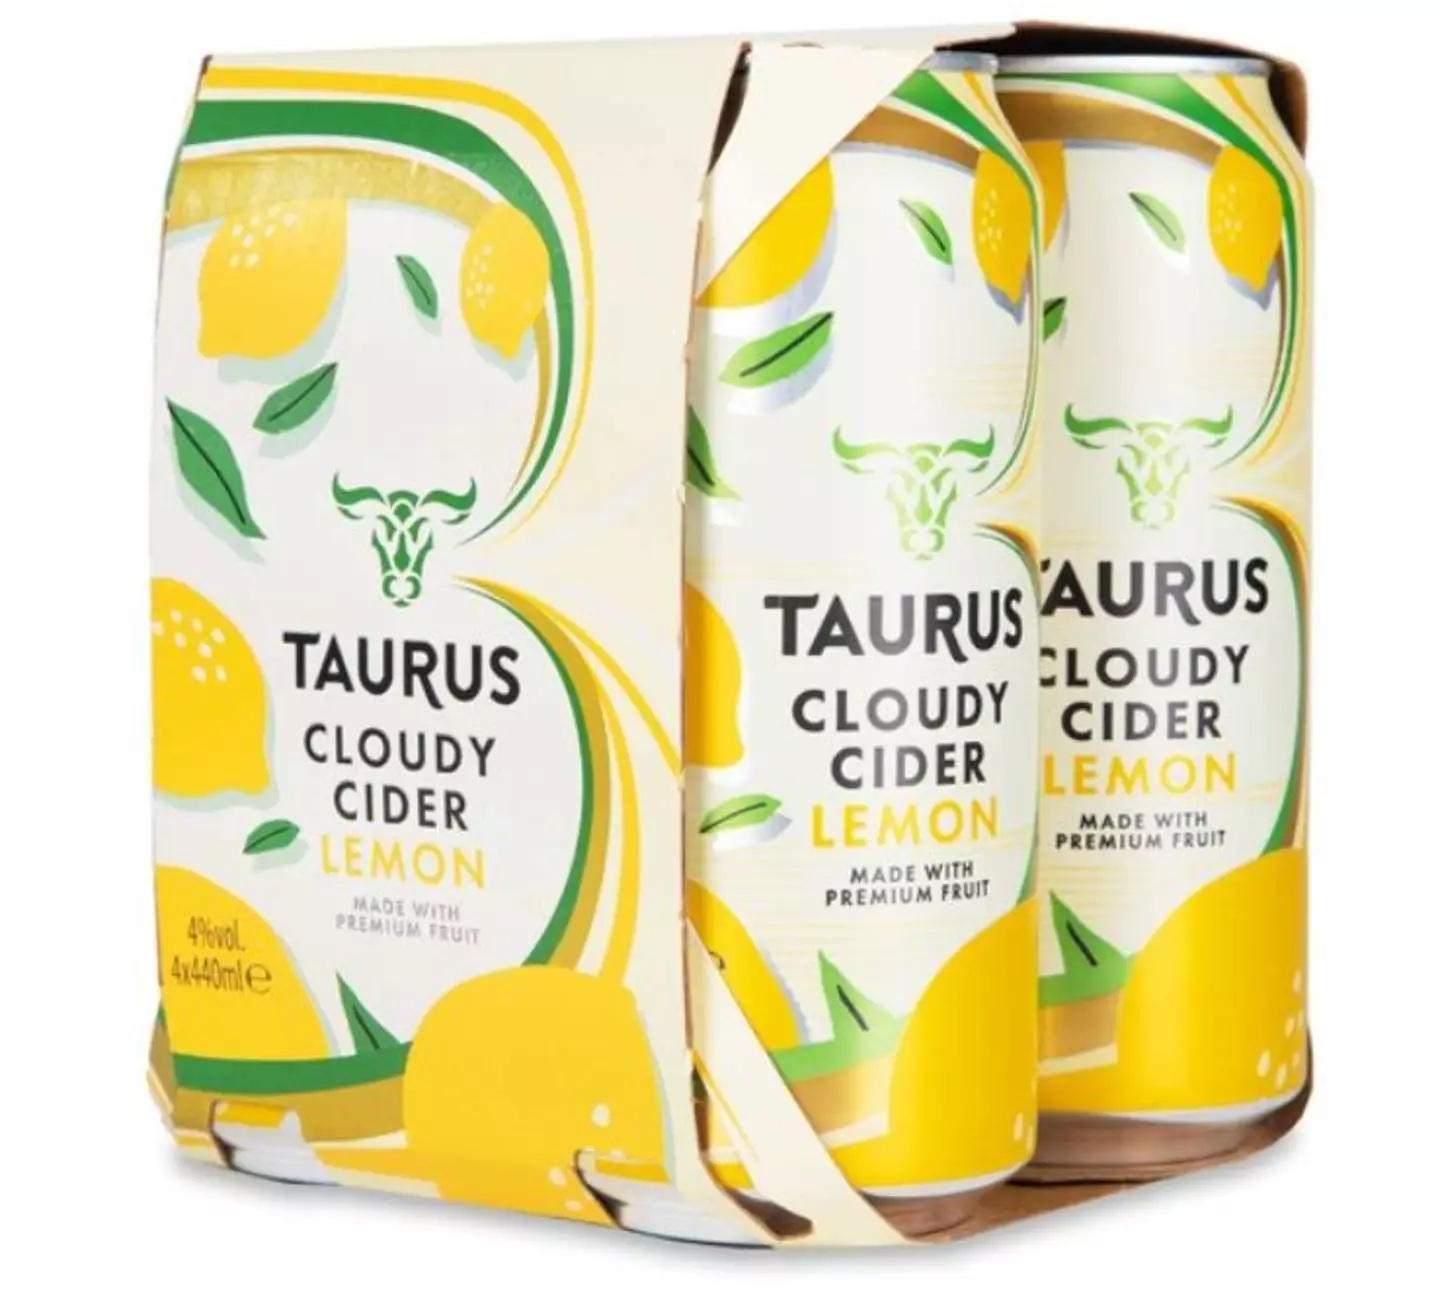 This is Aldi's cloudy lemon cider, Taurus. It might look a bit similar but a judge decided it's not copying Thatchers.